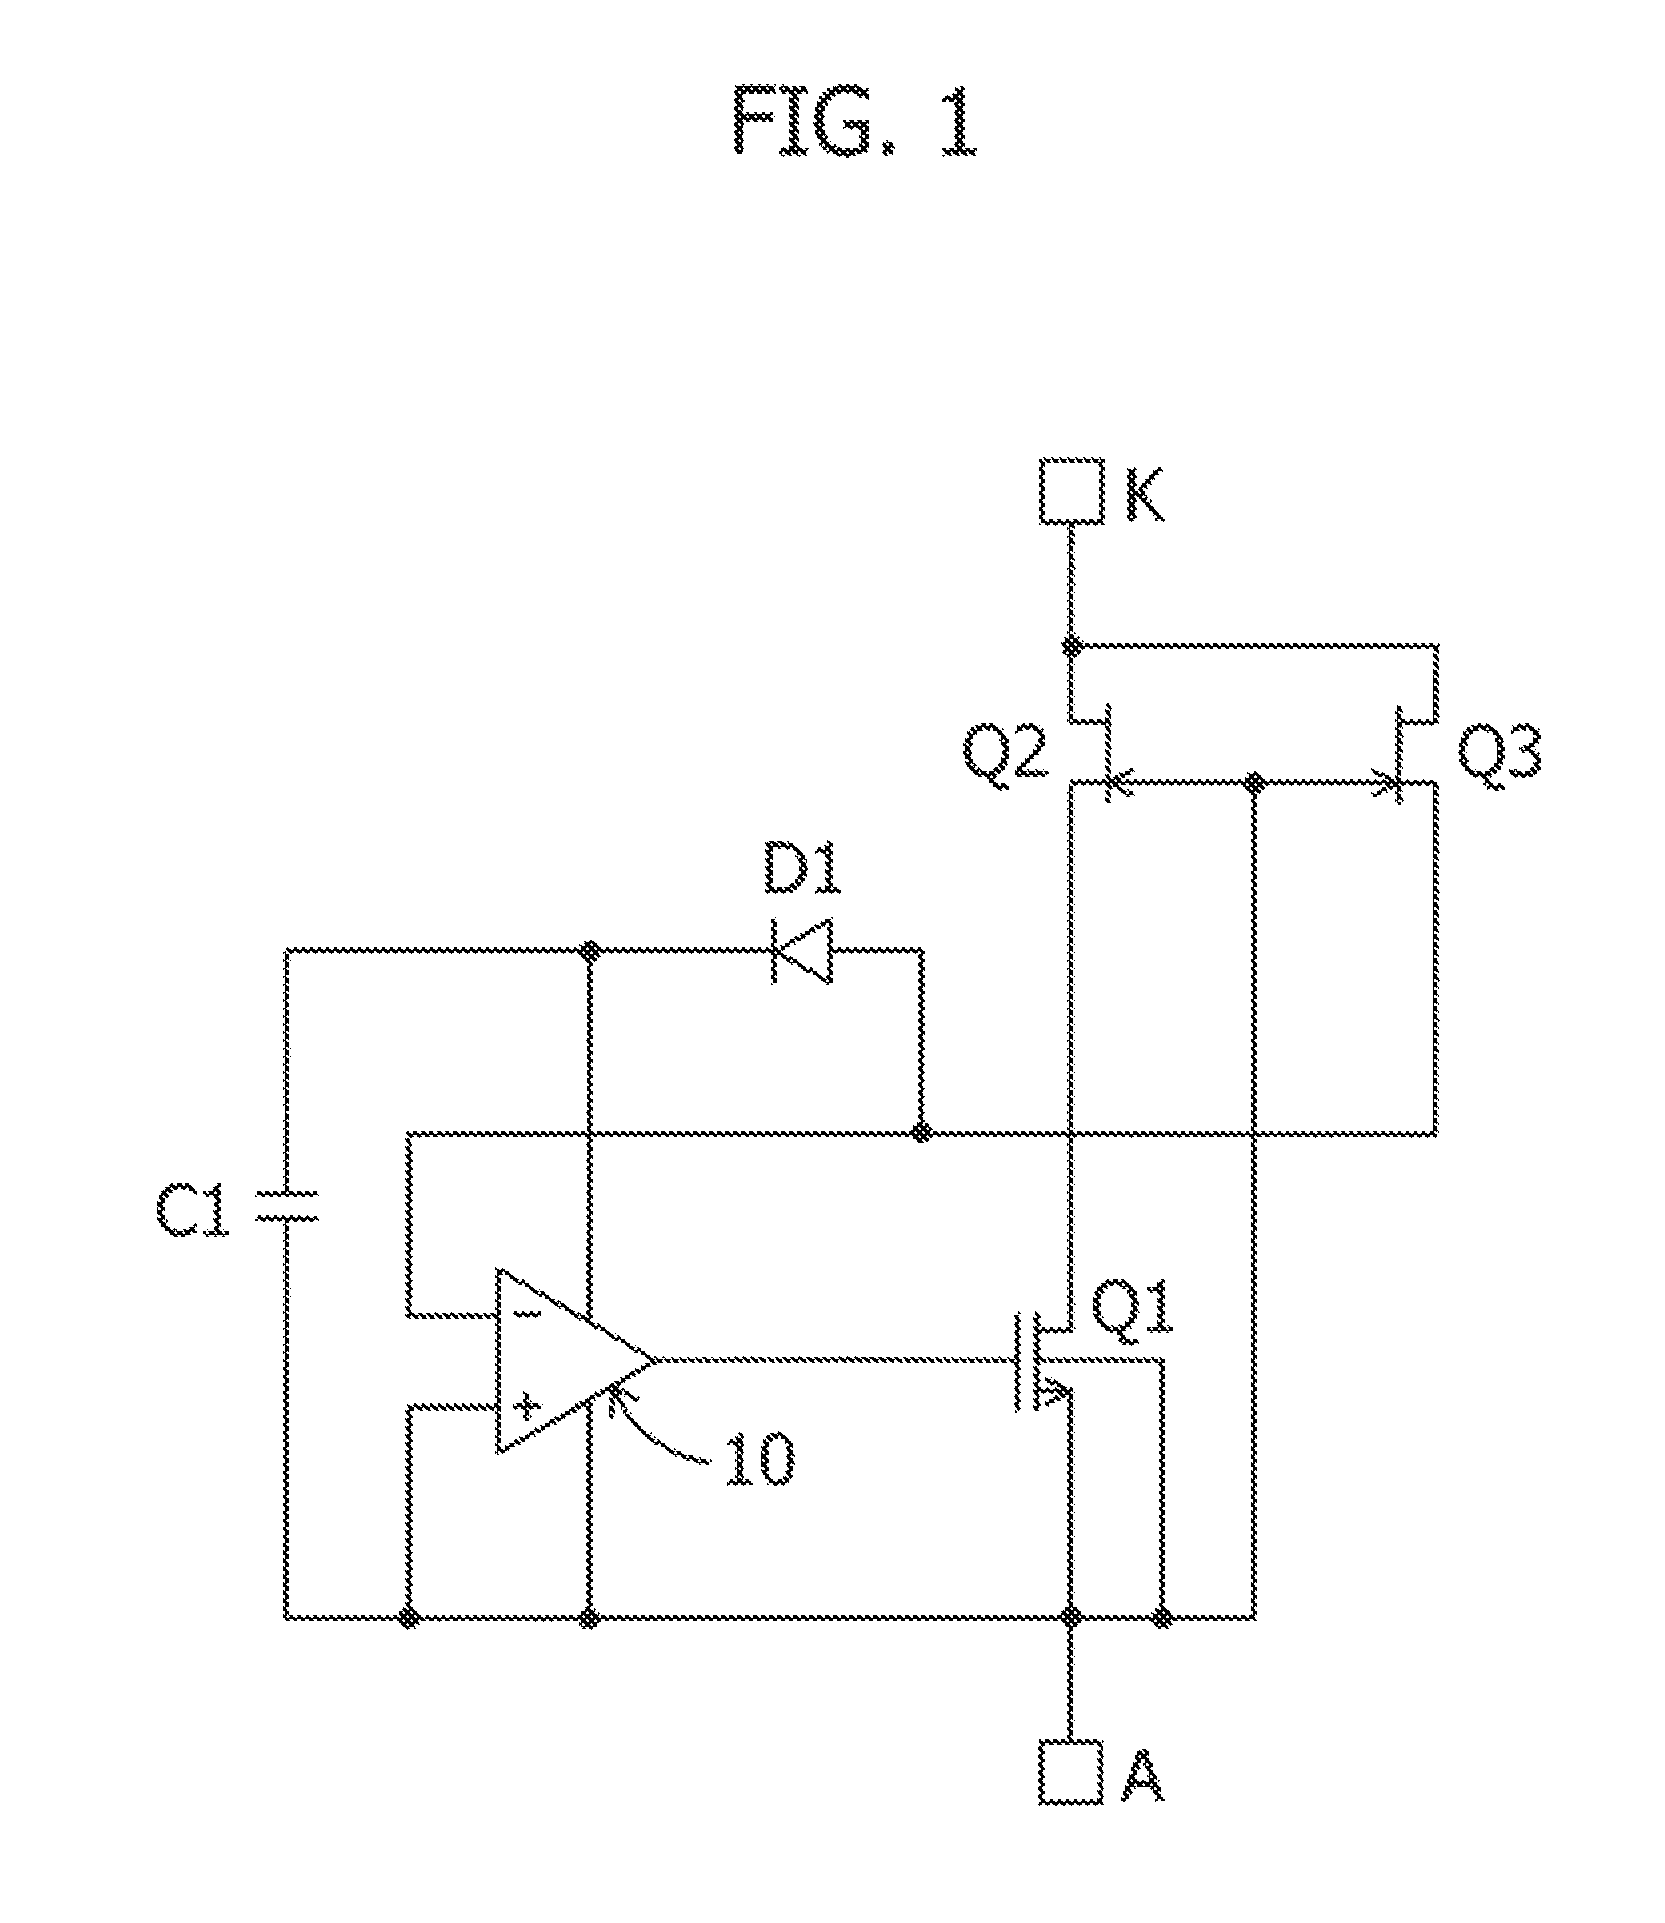 Active rectifying apparatus